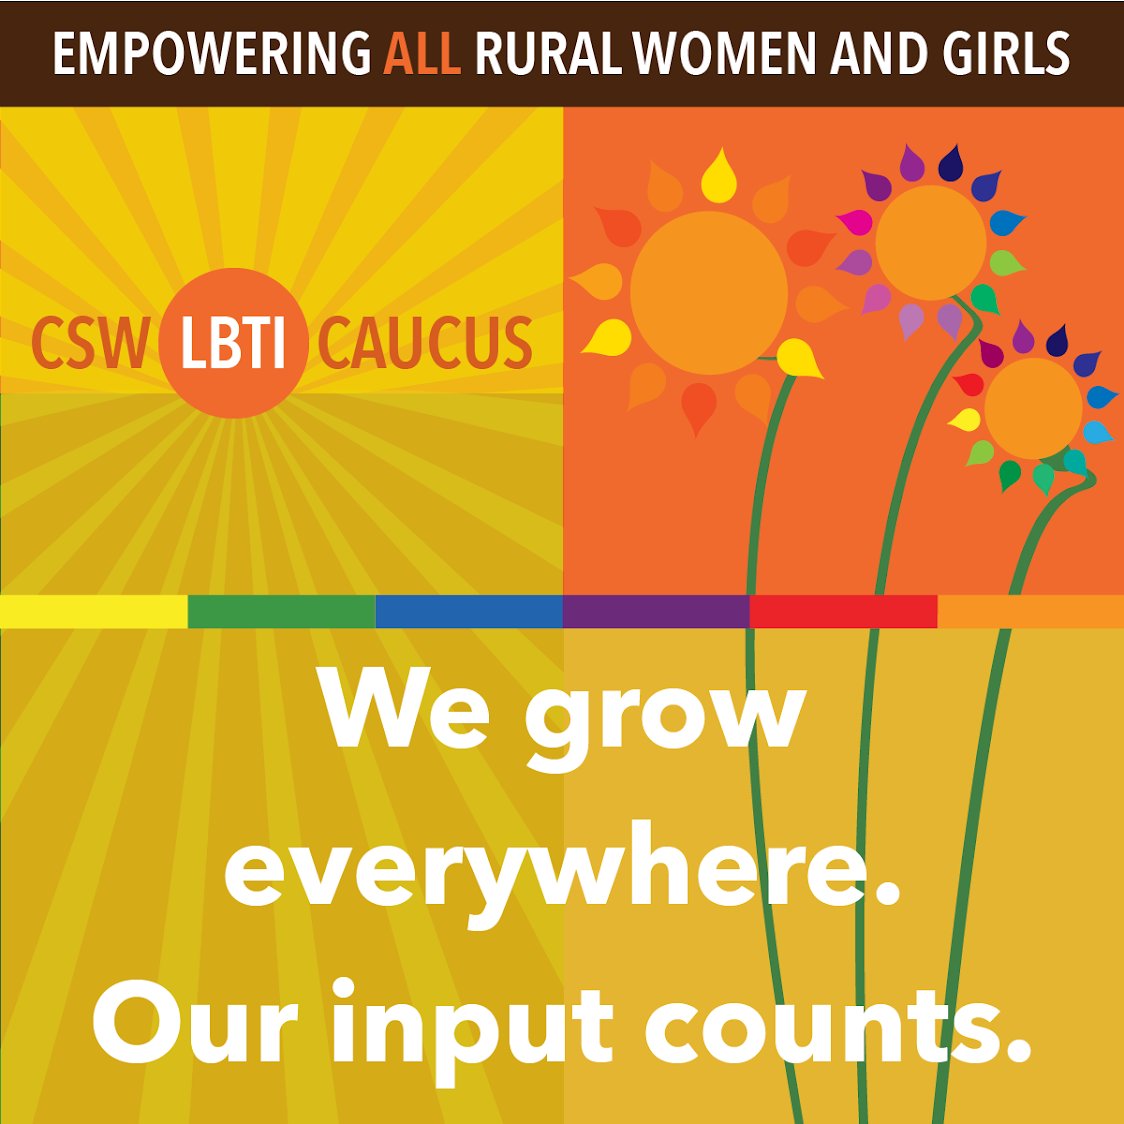 In rural communities, global #poverty and increasing #inequality result in lack of access to services and resources, and exacerbates #violence, #stigma and discrimination for #LBTI people. #CSW62 #CSW4LBTI #feministvision @UN_CSW